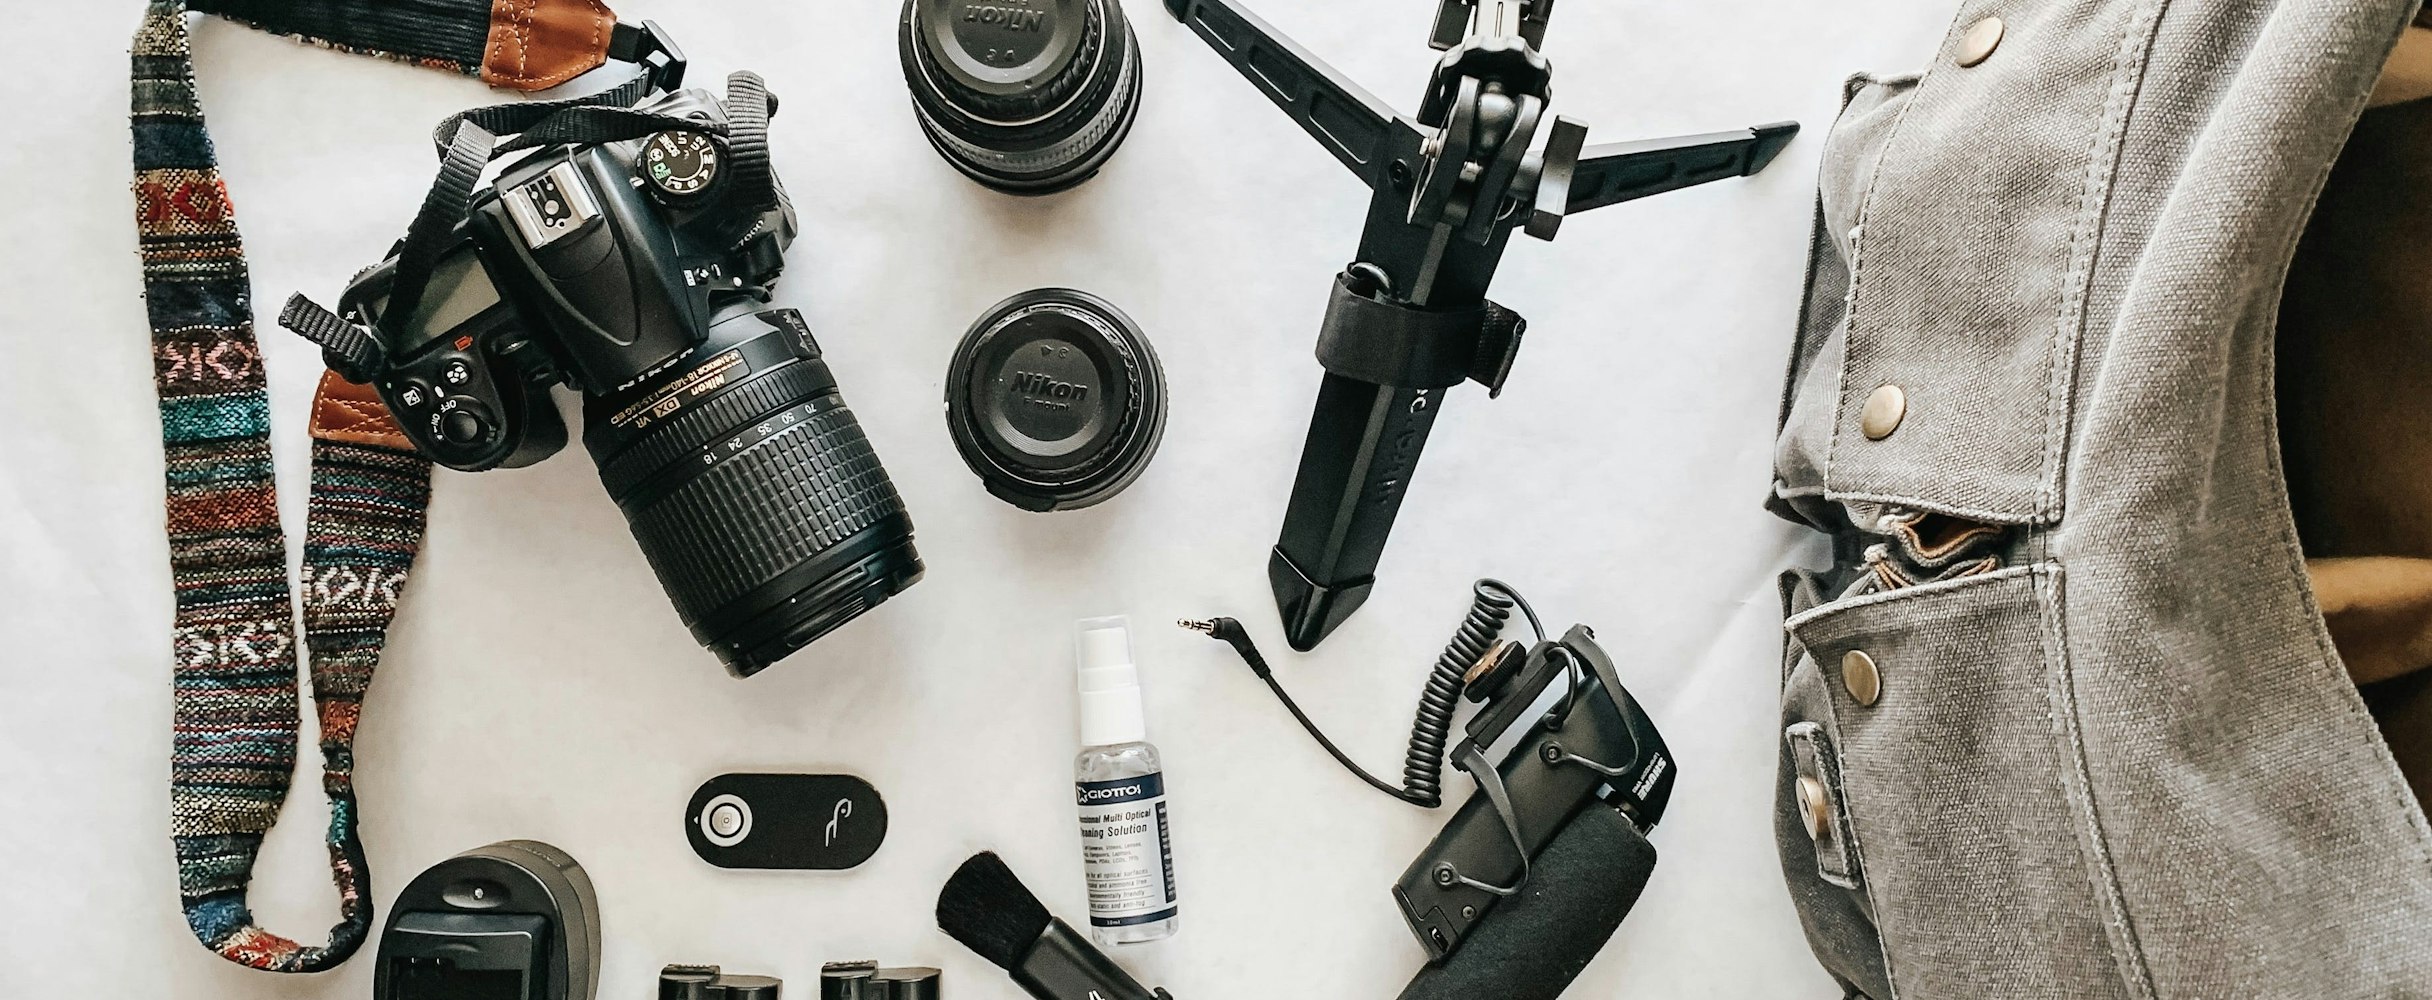 5 Items from AliExpress You Need in Your Camera Bag